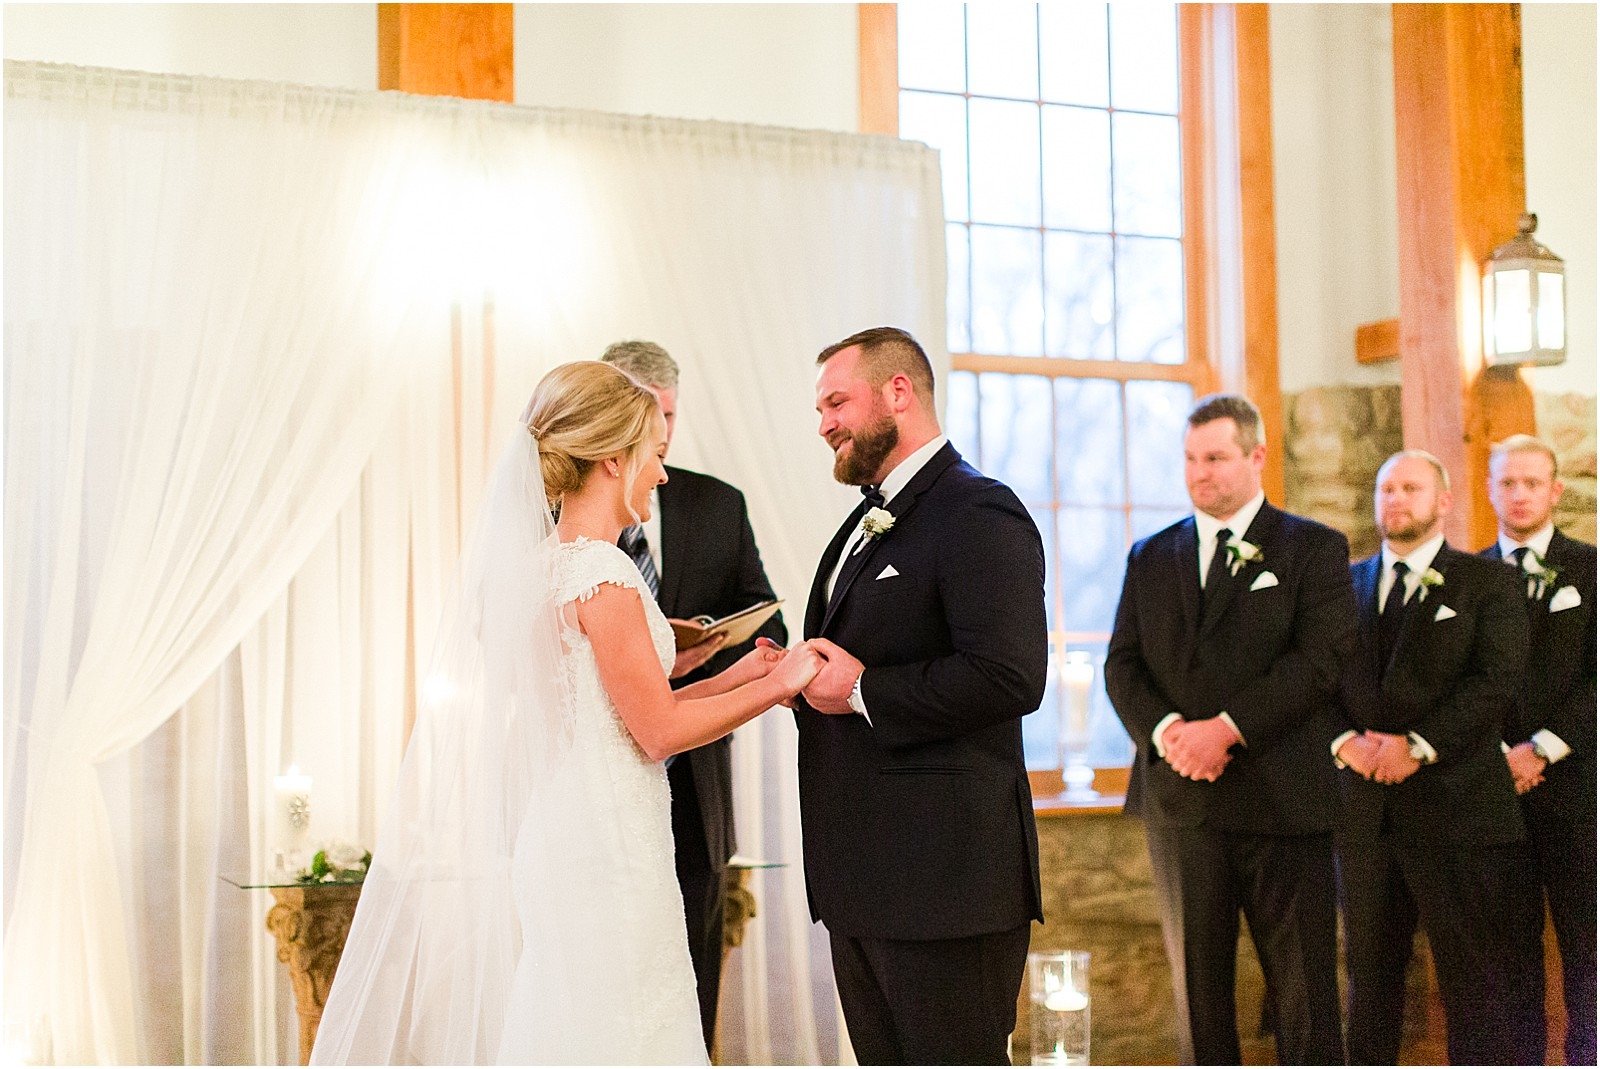 A Classic Winter Wedding in New Harmony | Rachel and Ryan | Bret and Brandie Photography 0116.jpg